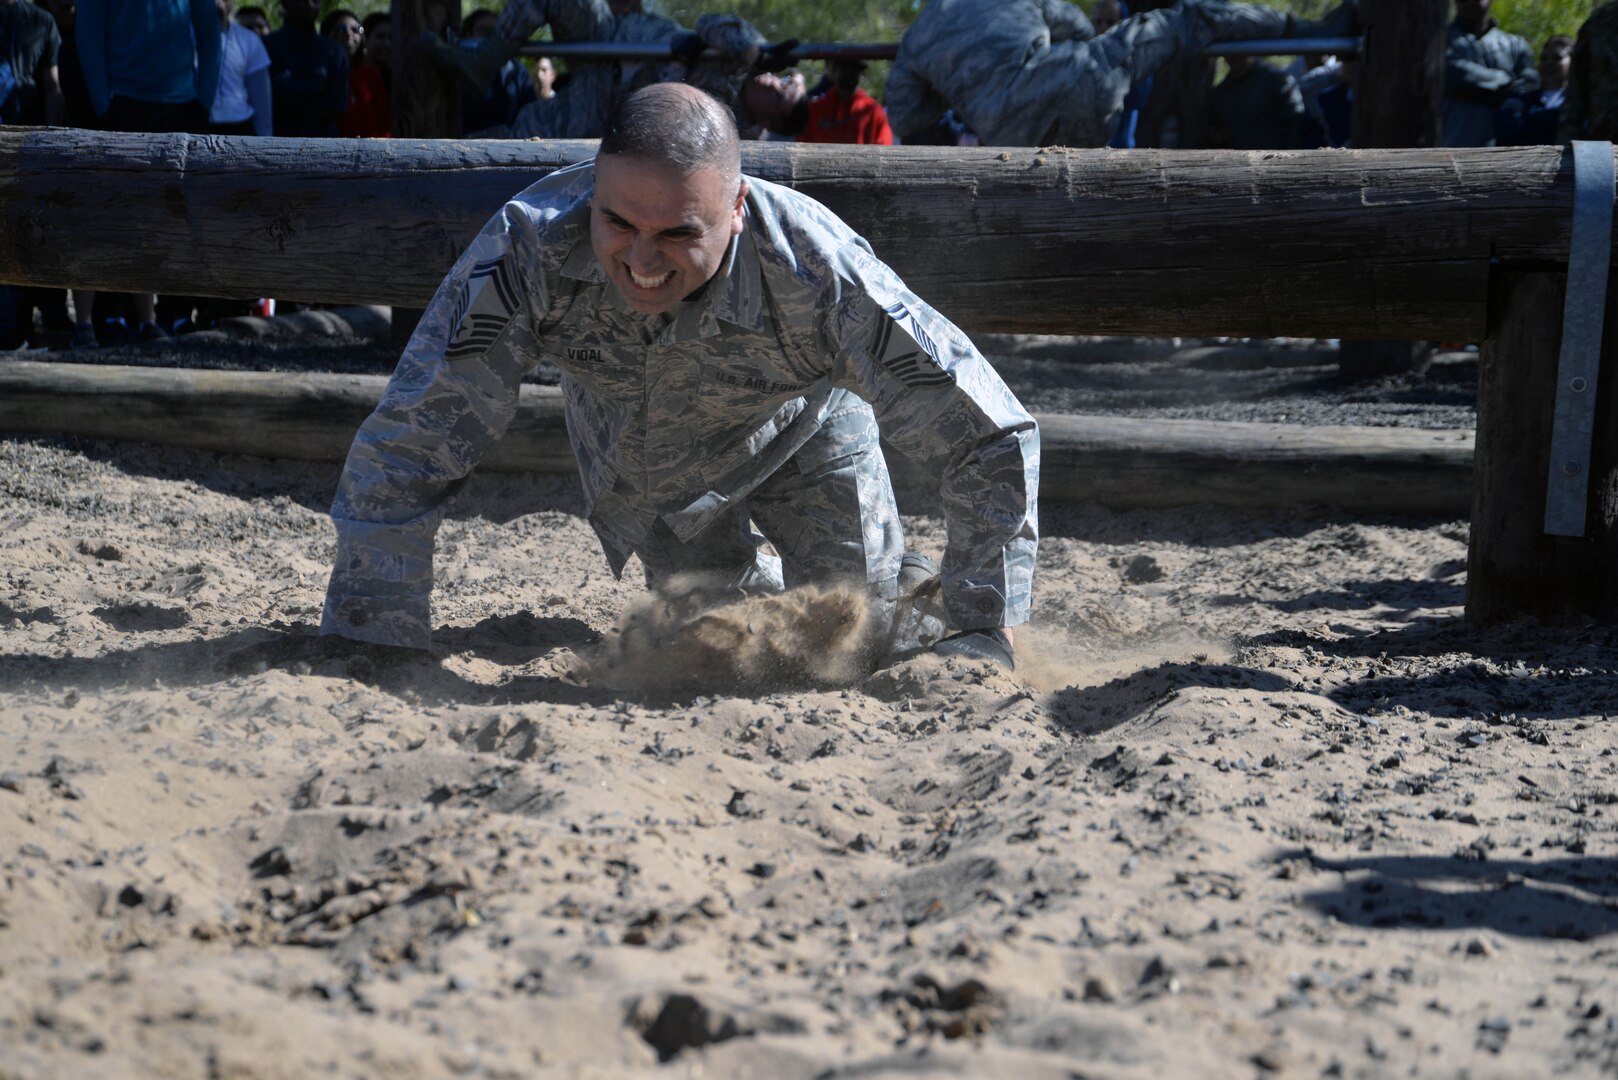 Senior Master Sgt. Leonard E. Vidal, 433rd Maintenance Group plans and schedule supervisor, high-crawls through sand during a team-building exercise at the 433rd AW Resilience Tactical Pause at the Air Force Basic Military Training’s Basic Expeditionary Airman Skills Training site at the Medina Annex, Joint Base San Antonio-Lackland, Texas Nov. 3, 2019.